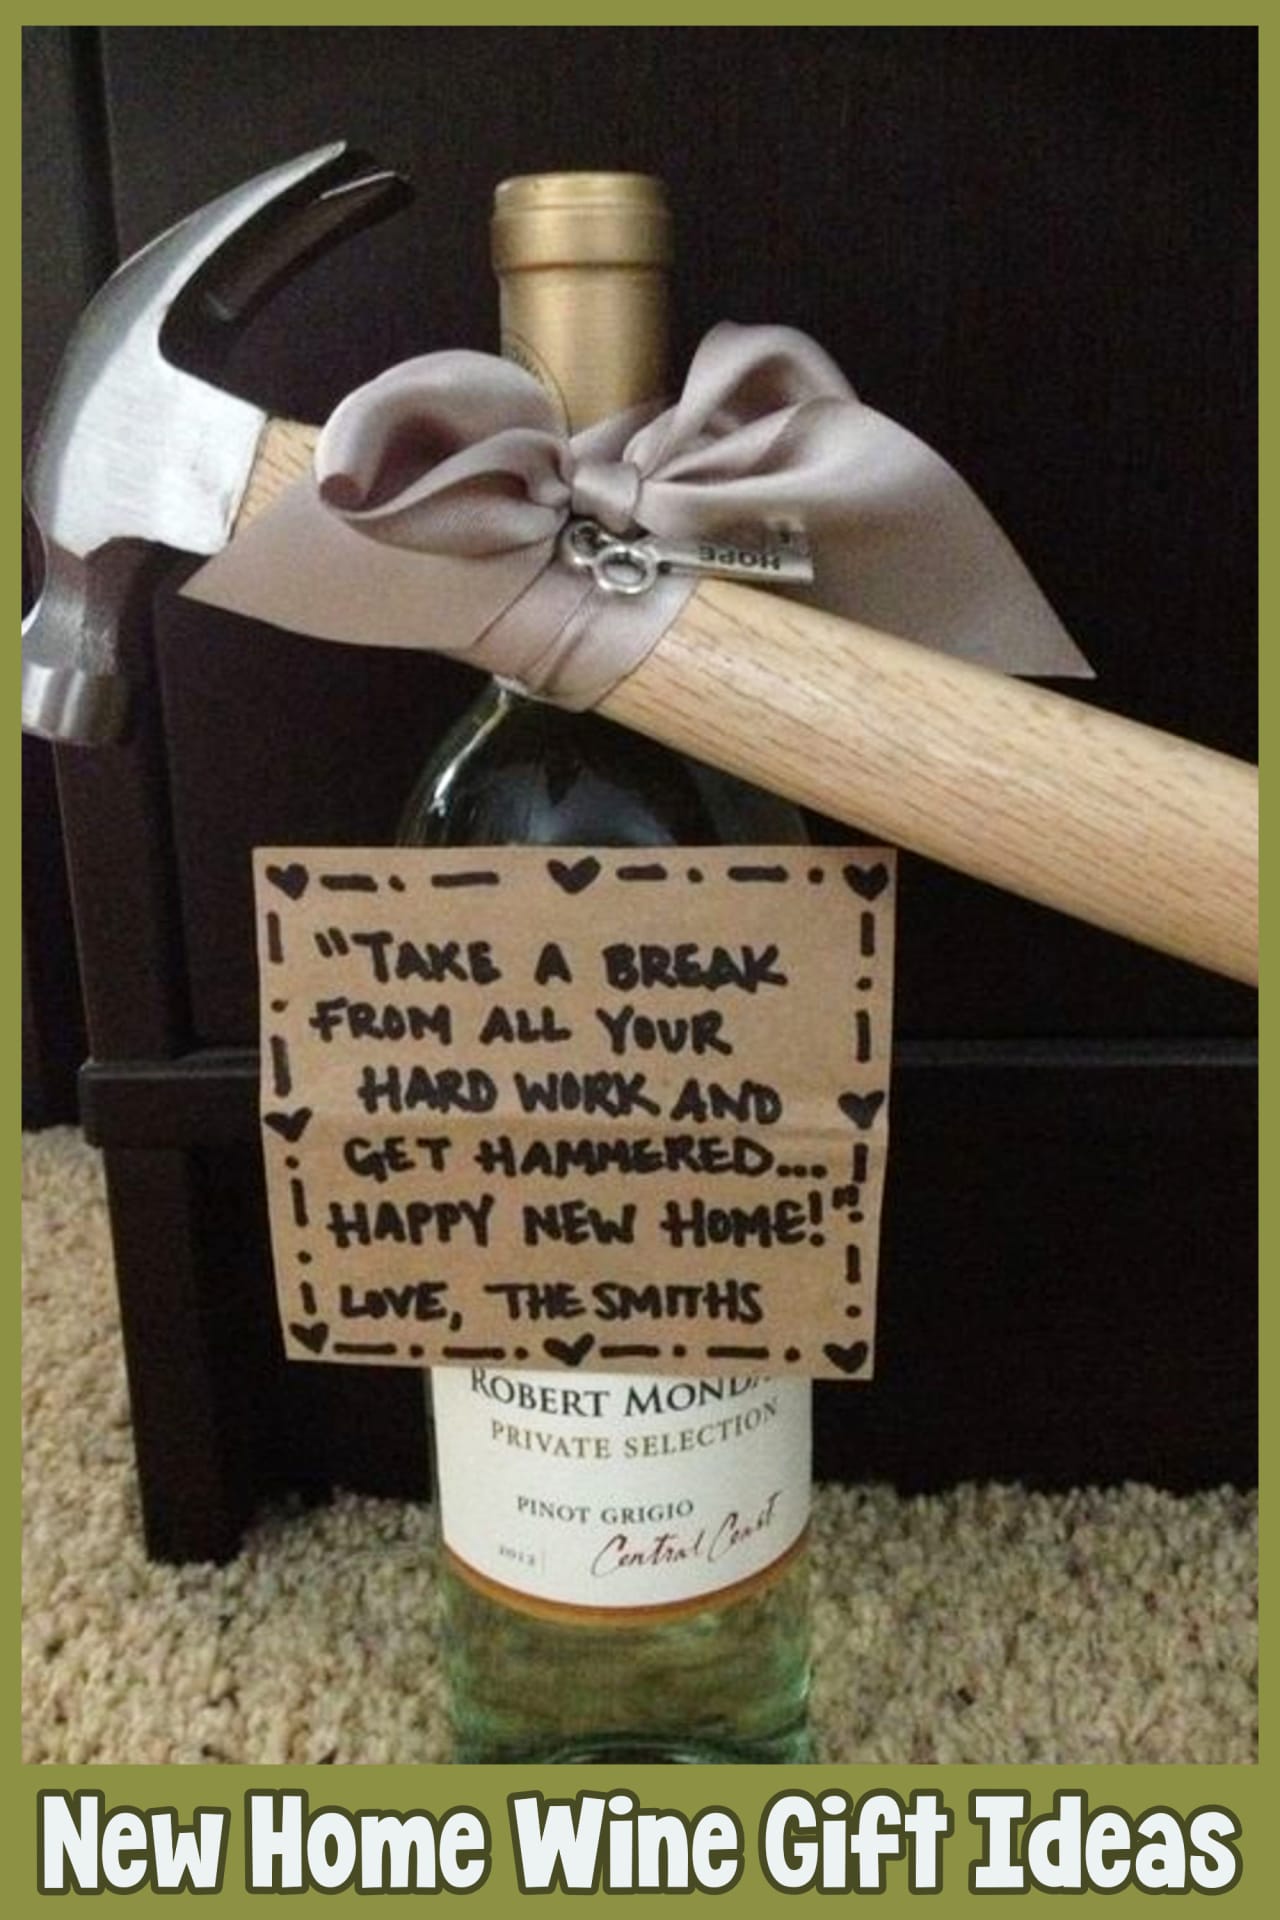 housewarming new home wine gift ideas for wine lovers - Housewarming Gifts For First Time Homeowners in Their First Home - Unique Housewarming Gift Ideas and DIY Housewarming Gifts They'll Love - First Time Home Buyer Gift Basket